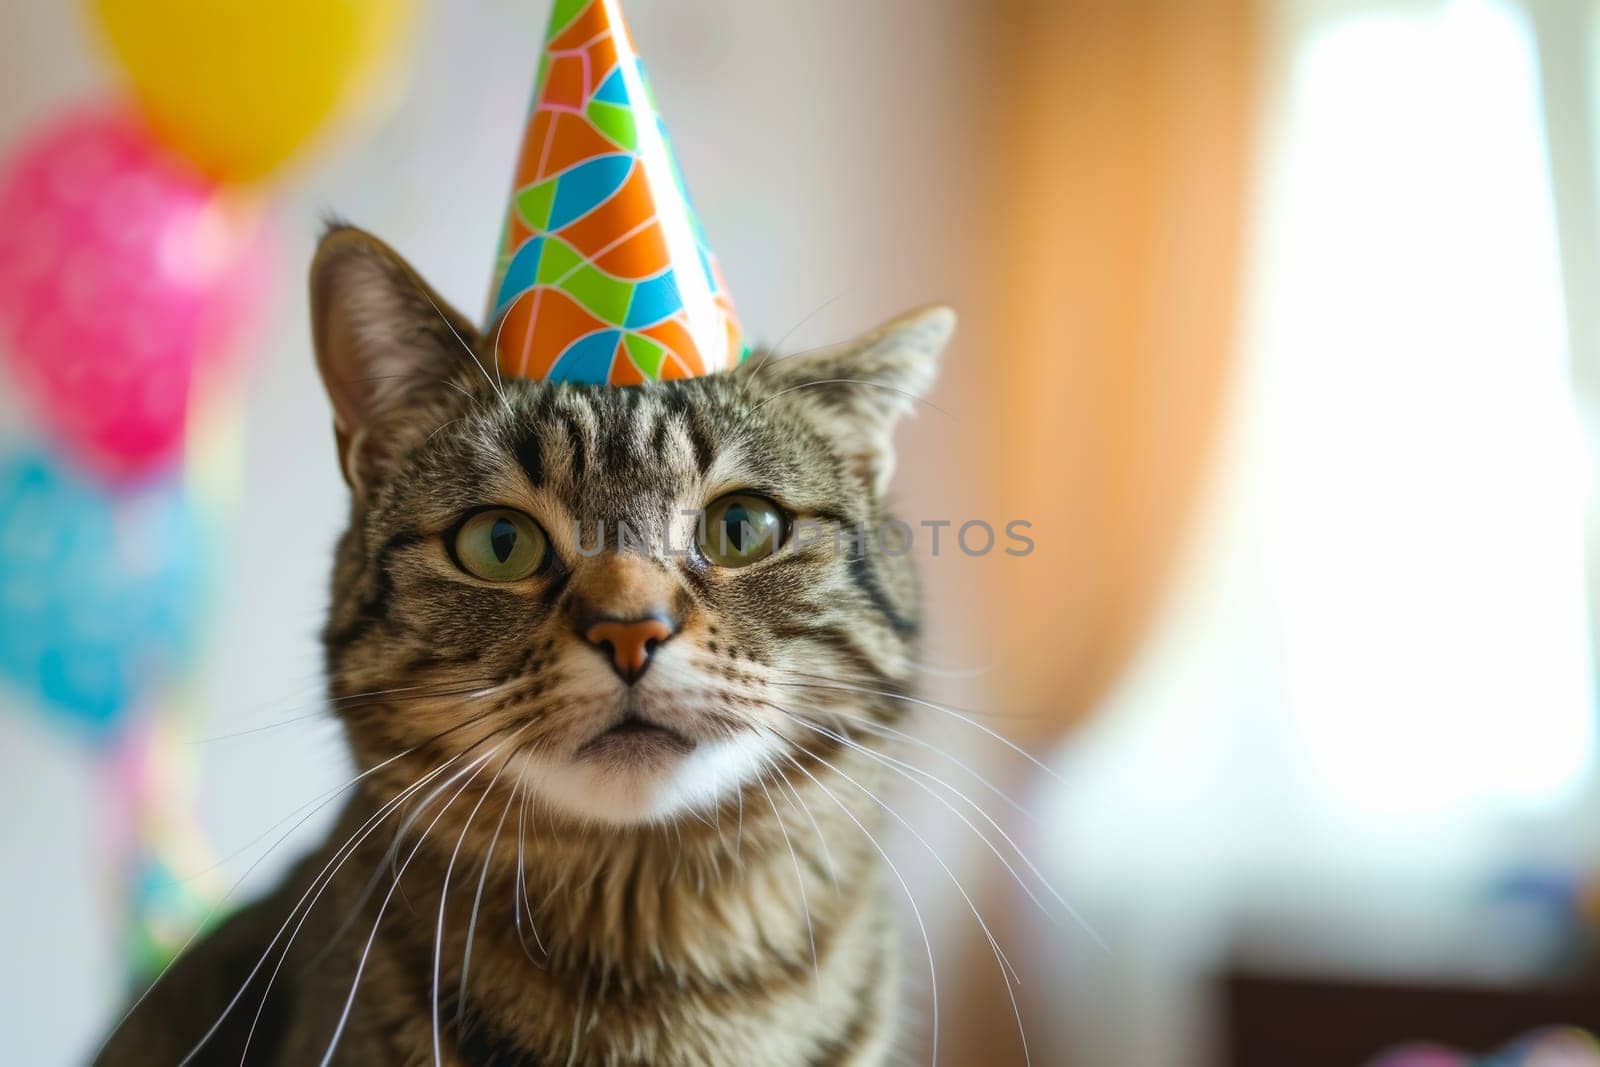 Cat in Party Hat With Balloons by vladimka